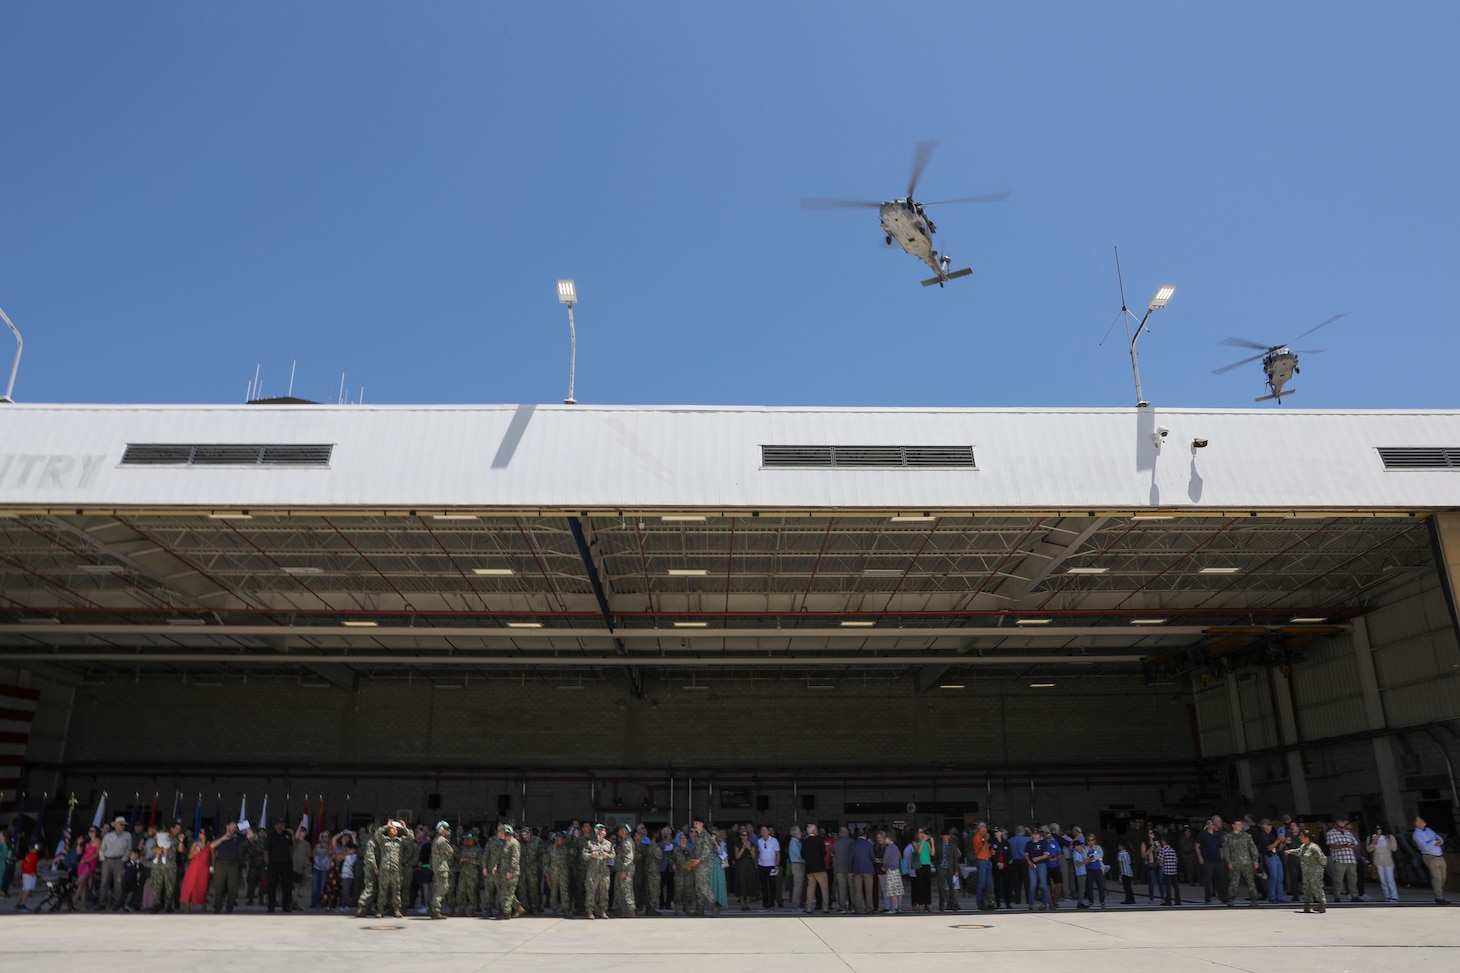 MH-60S Seahawks assigned to the "Firehawks" of Helicopter Sea Combat Squadron (HSC) 85 fly over the squadron's hangar during the squadron's deactivation ceremony.